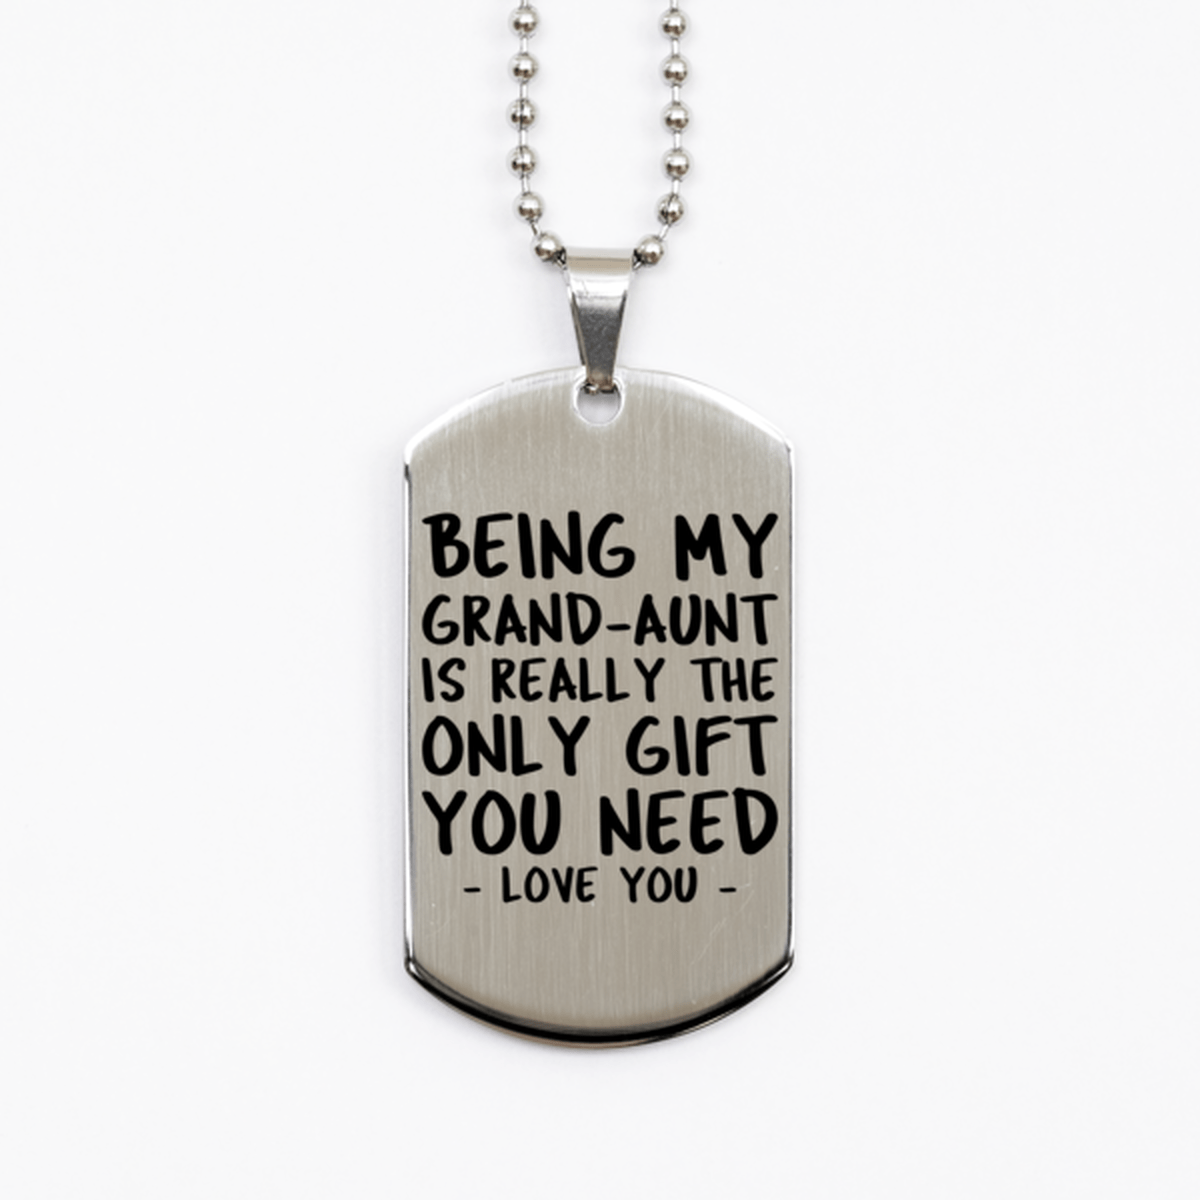 Funny Grand-aunt Silver Dog Tag Necklace, Being My Grand-aunt Is Really the Only Gift You Need, Best Birthday Gifts for Grand-aunt